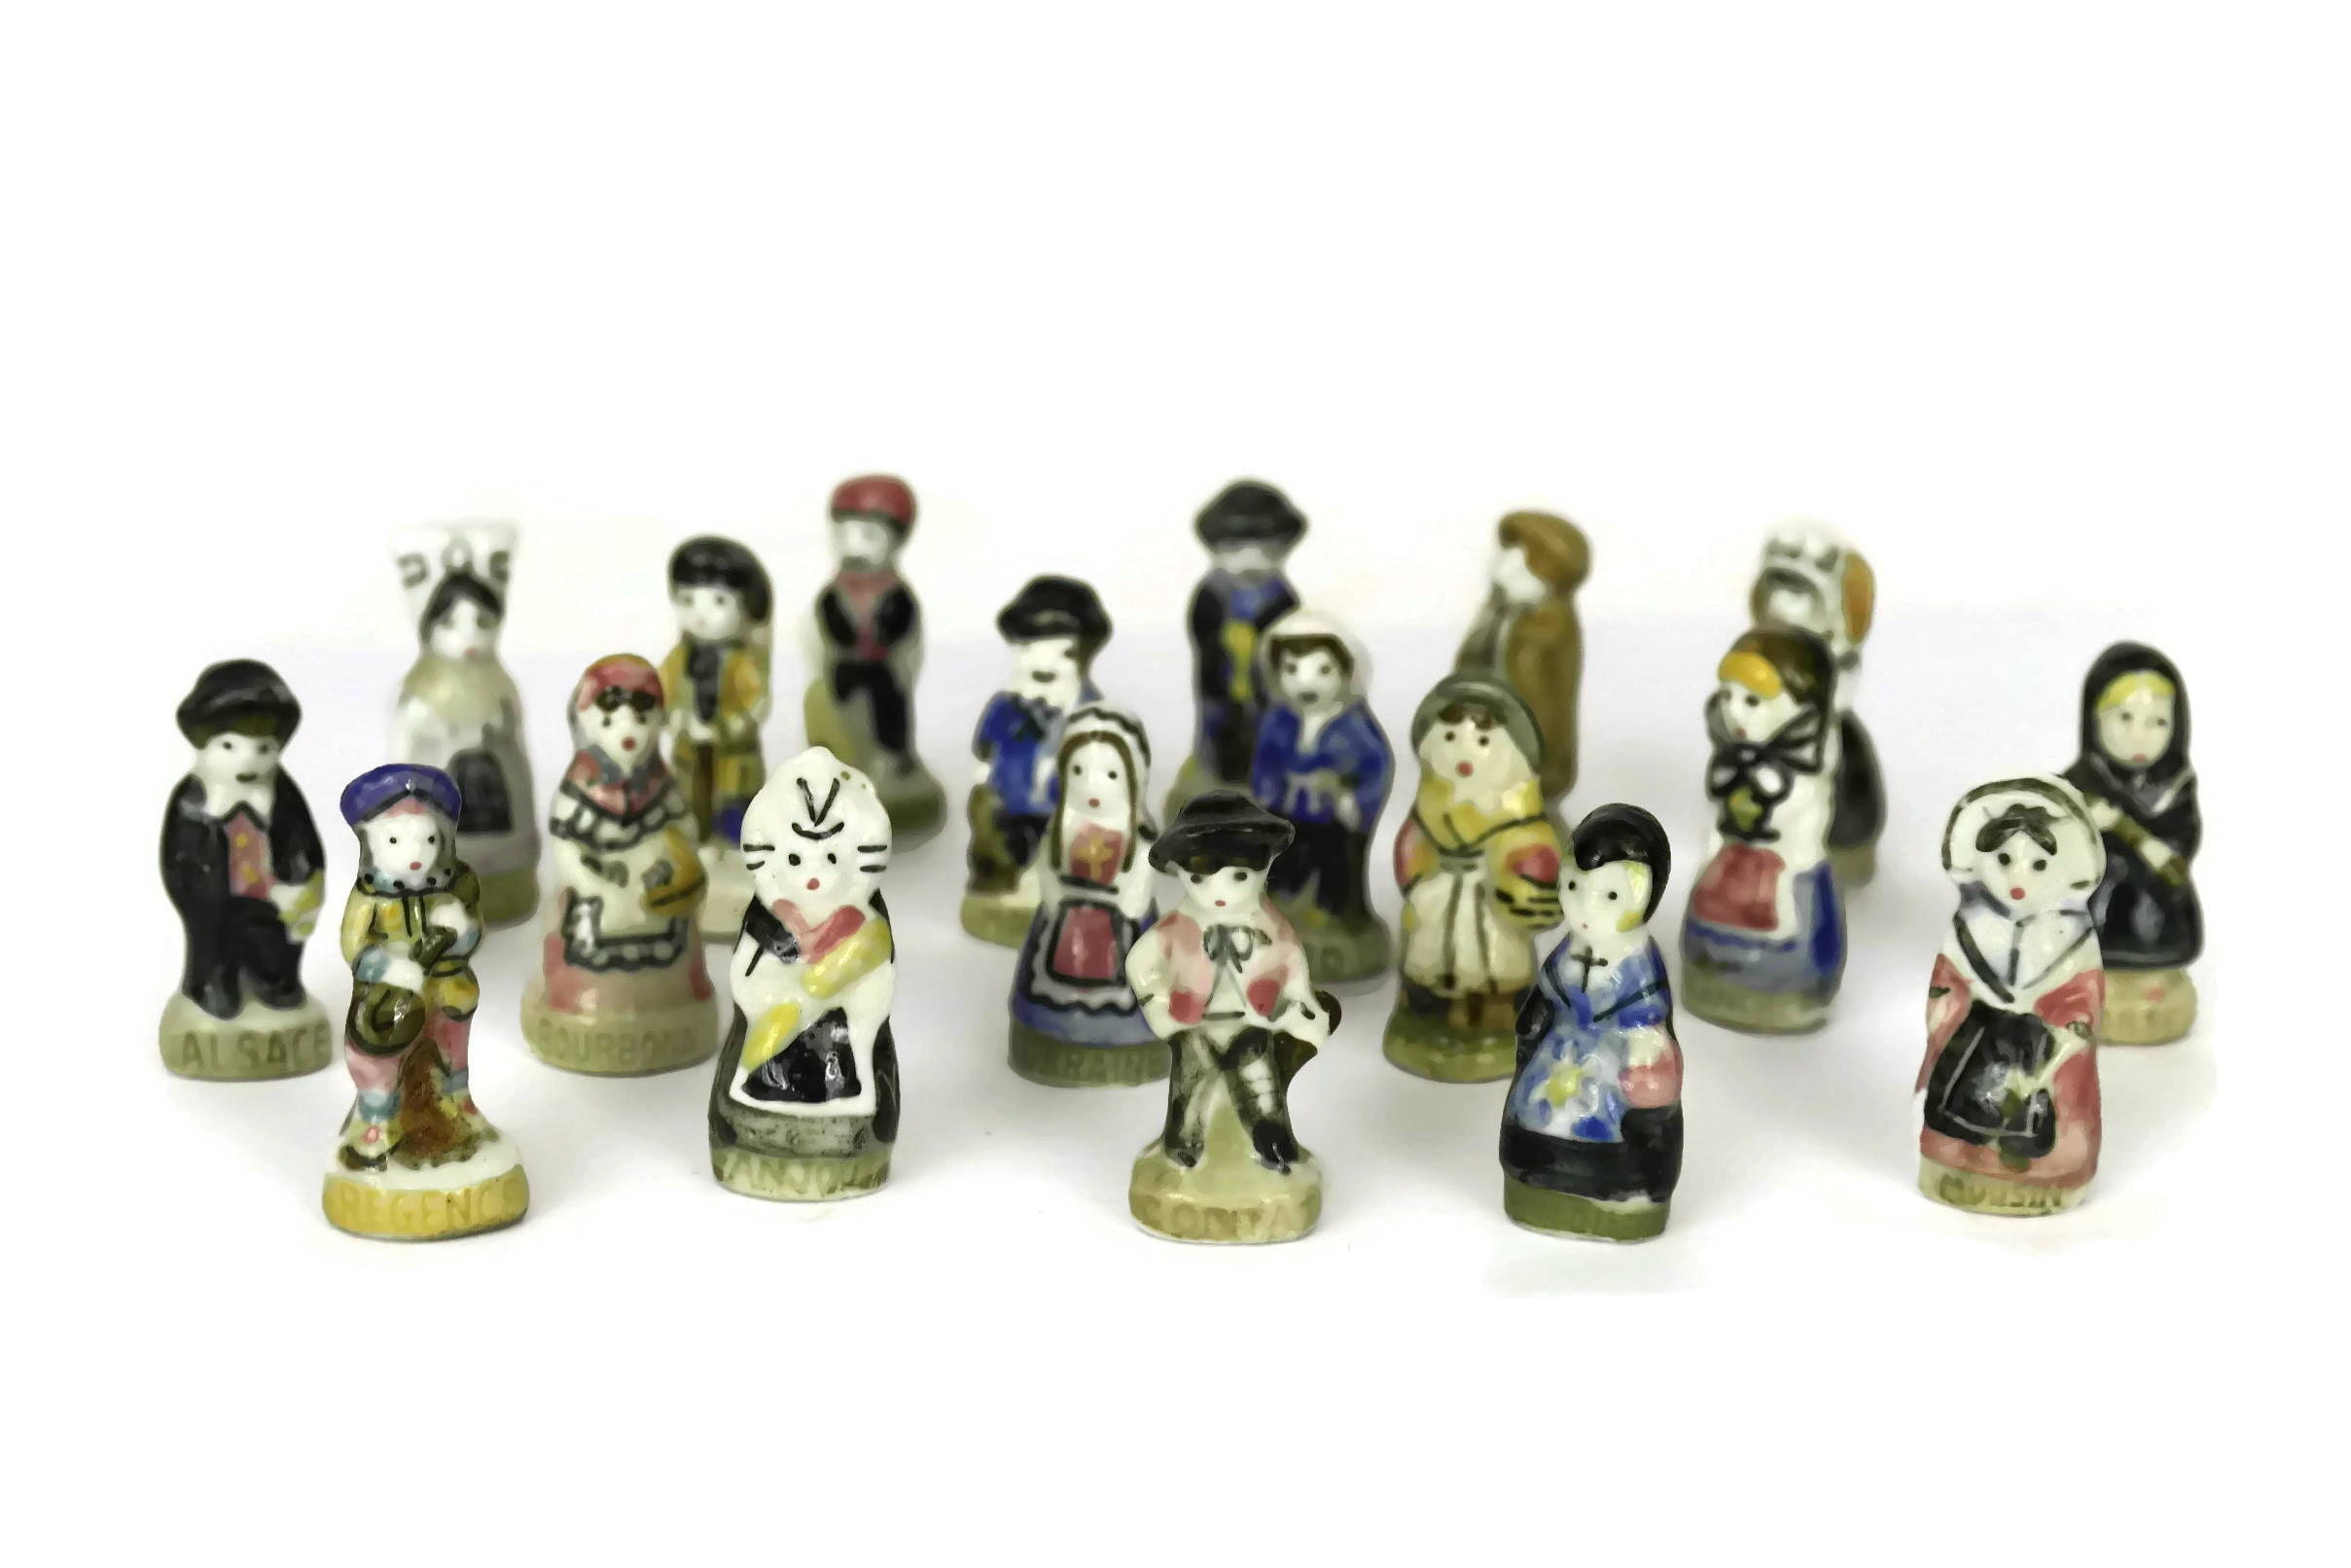 Miniature Porcelain Doll Figurines. Vintage French Feves Collection.  Regions of France Costumes and Dress Fashion Souvenir Figures.